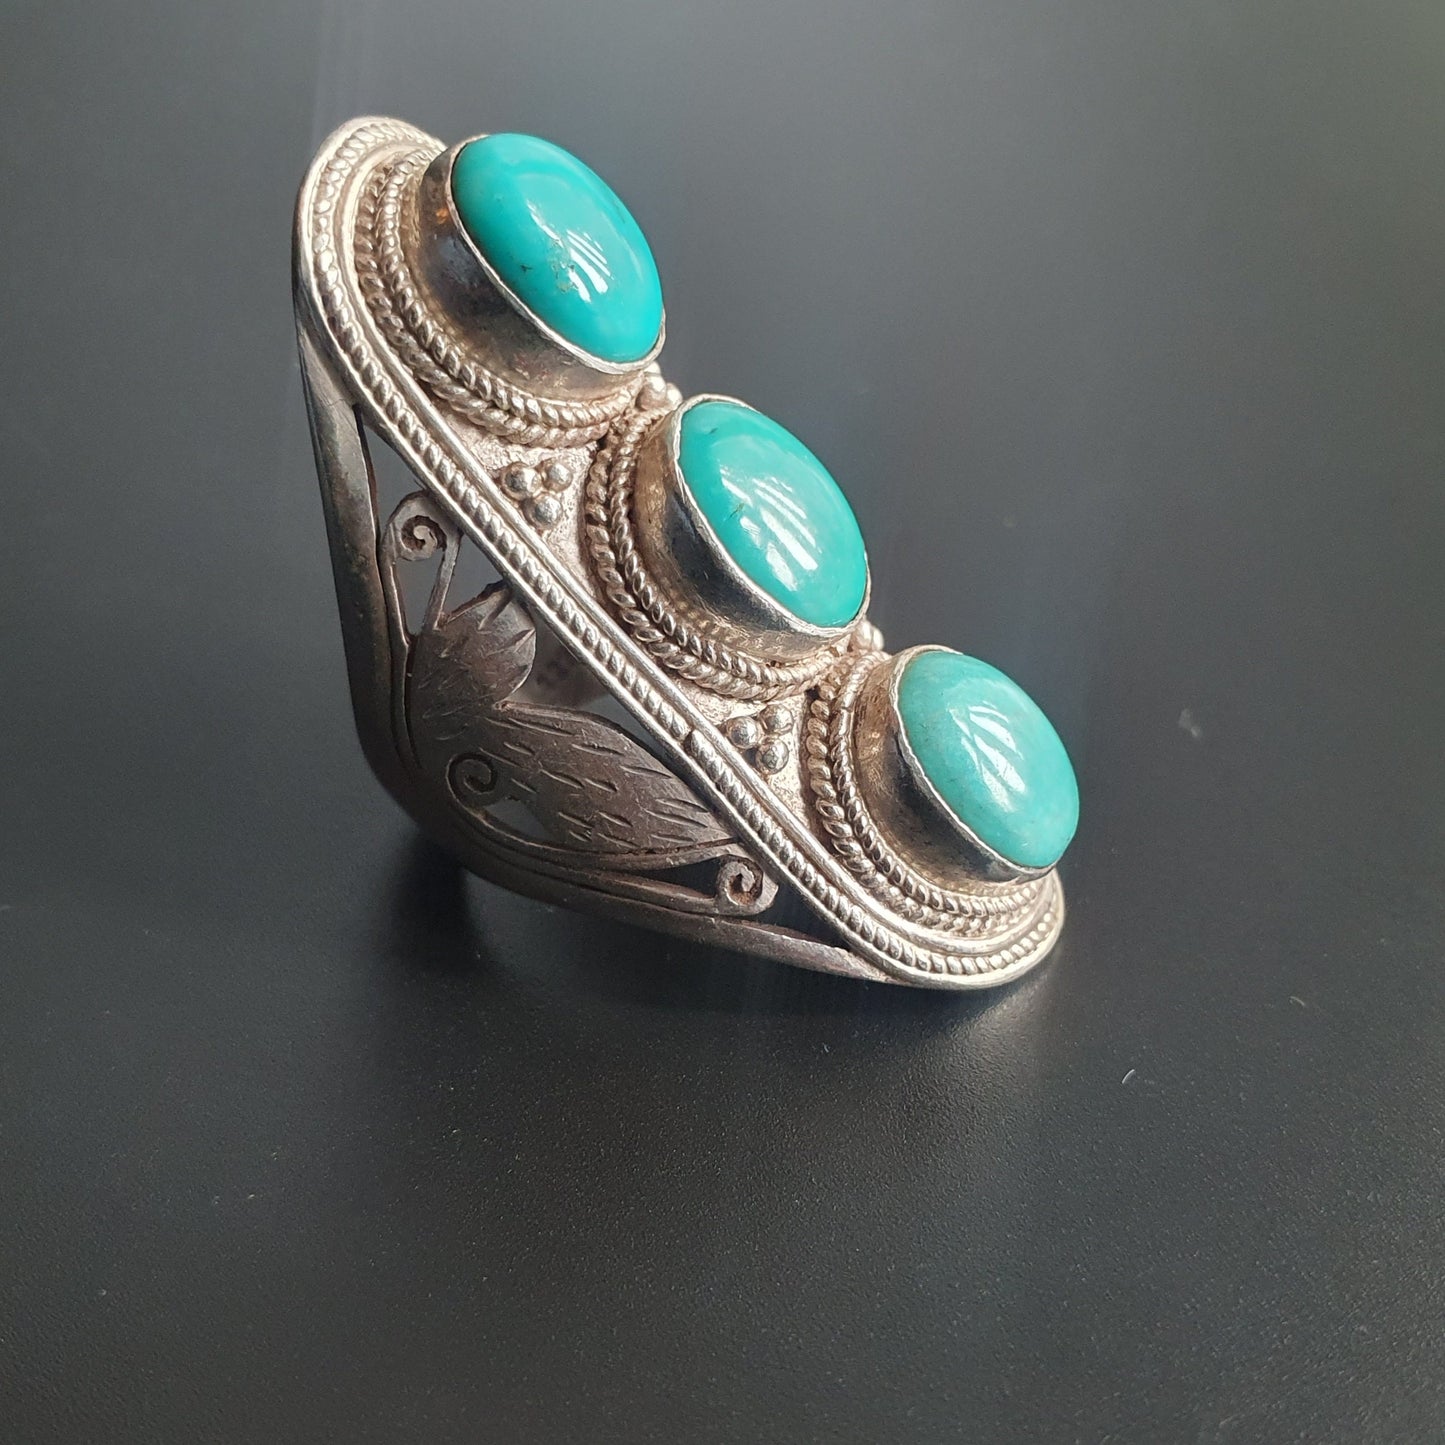 Boho ring, turquoise rings,long finger ring, statement ring, sterling silver, festival jewelry,free shipping, vintage handmade, ethnic ring,